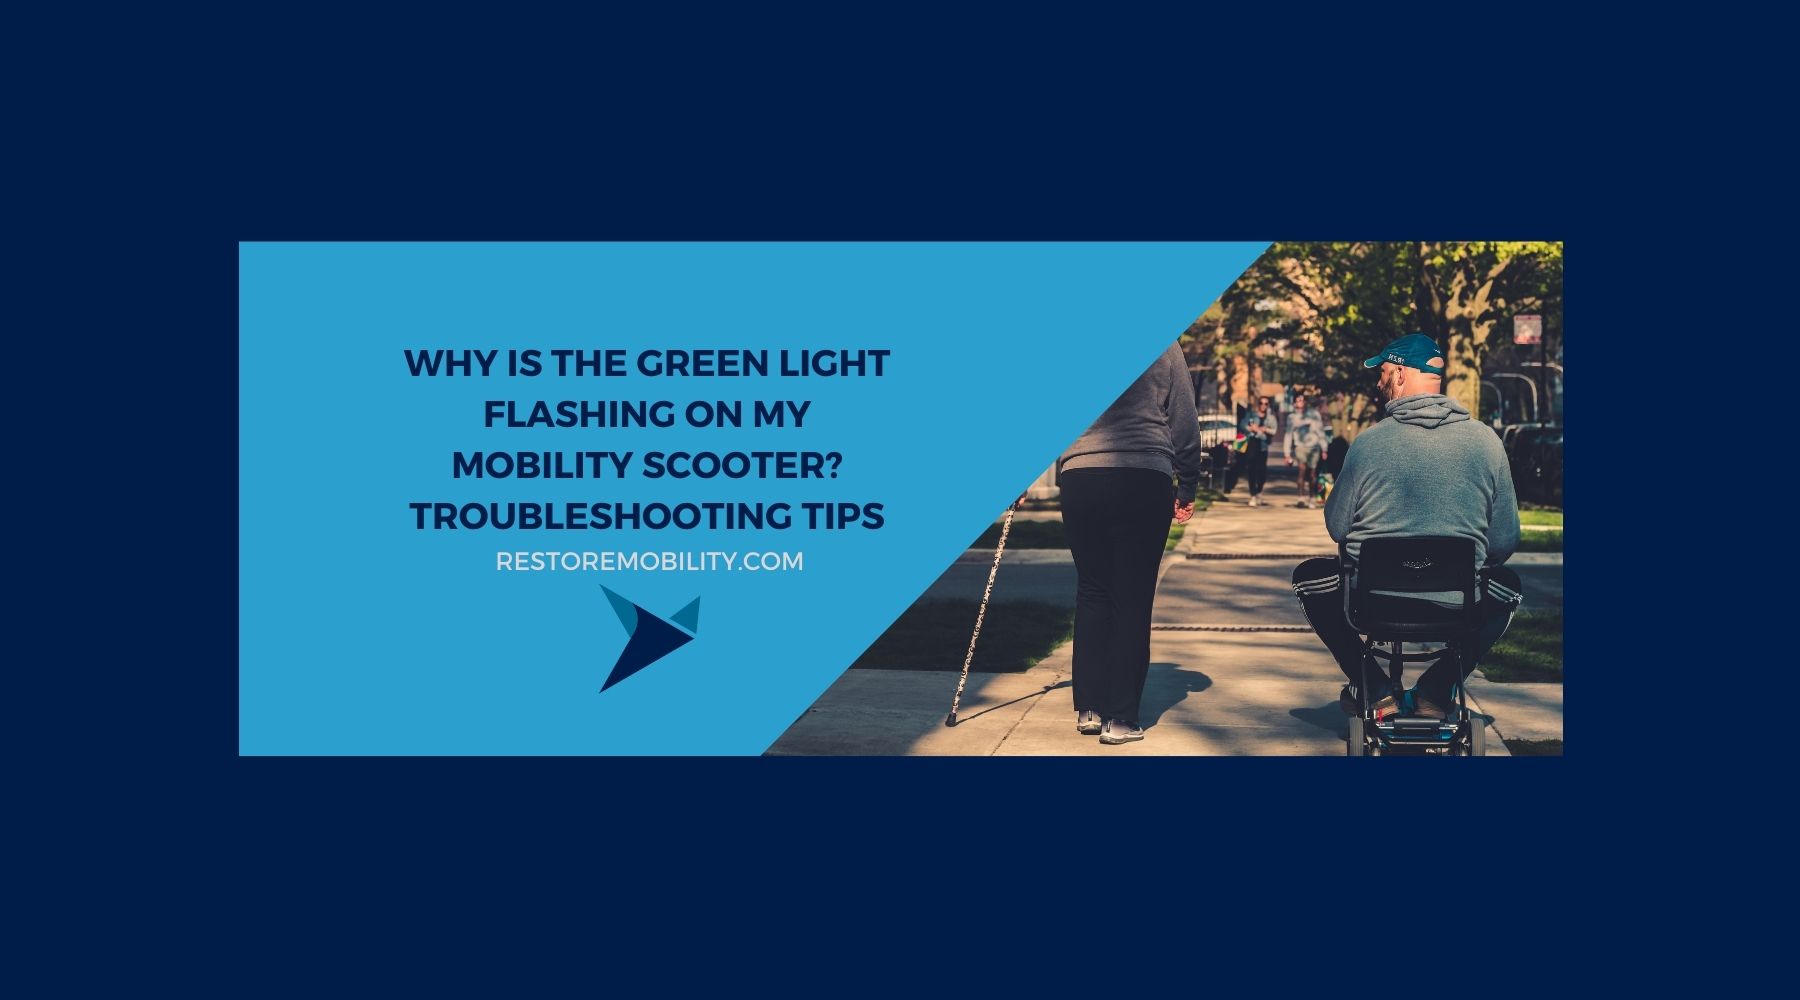 Why Is the Green Light Flashing on My Mobility Scooter?